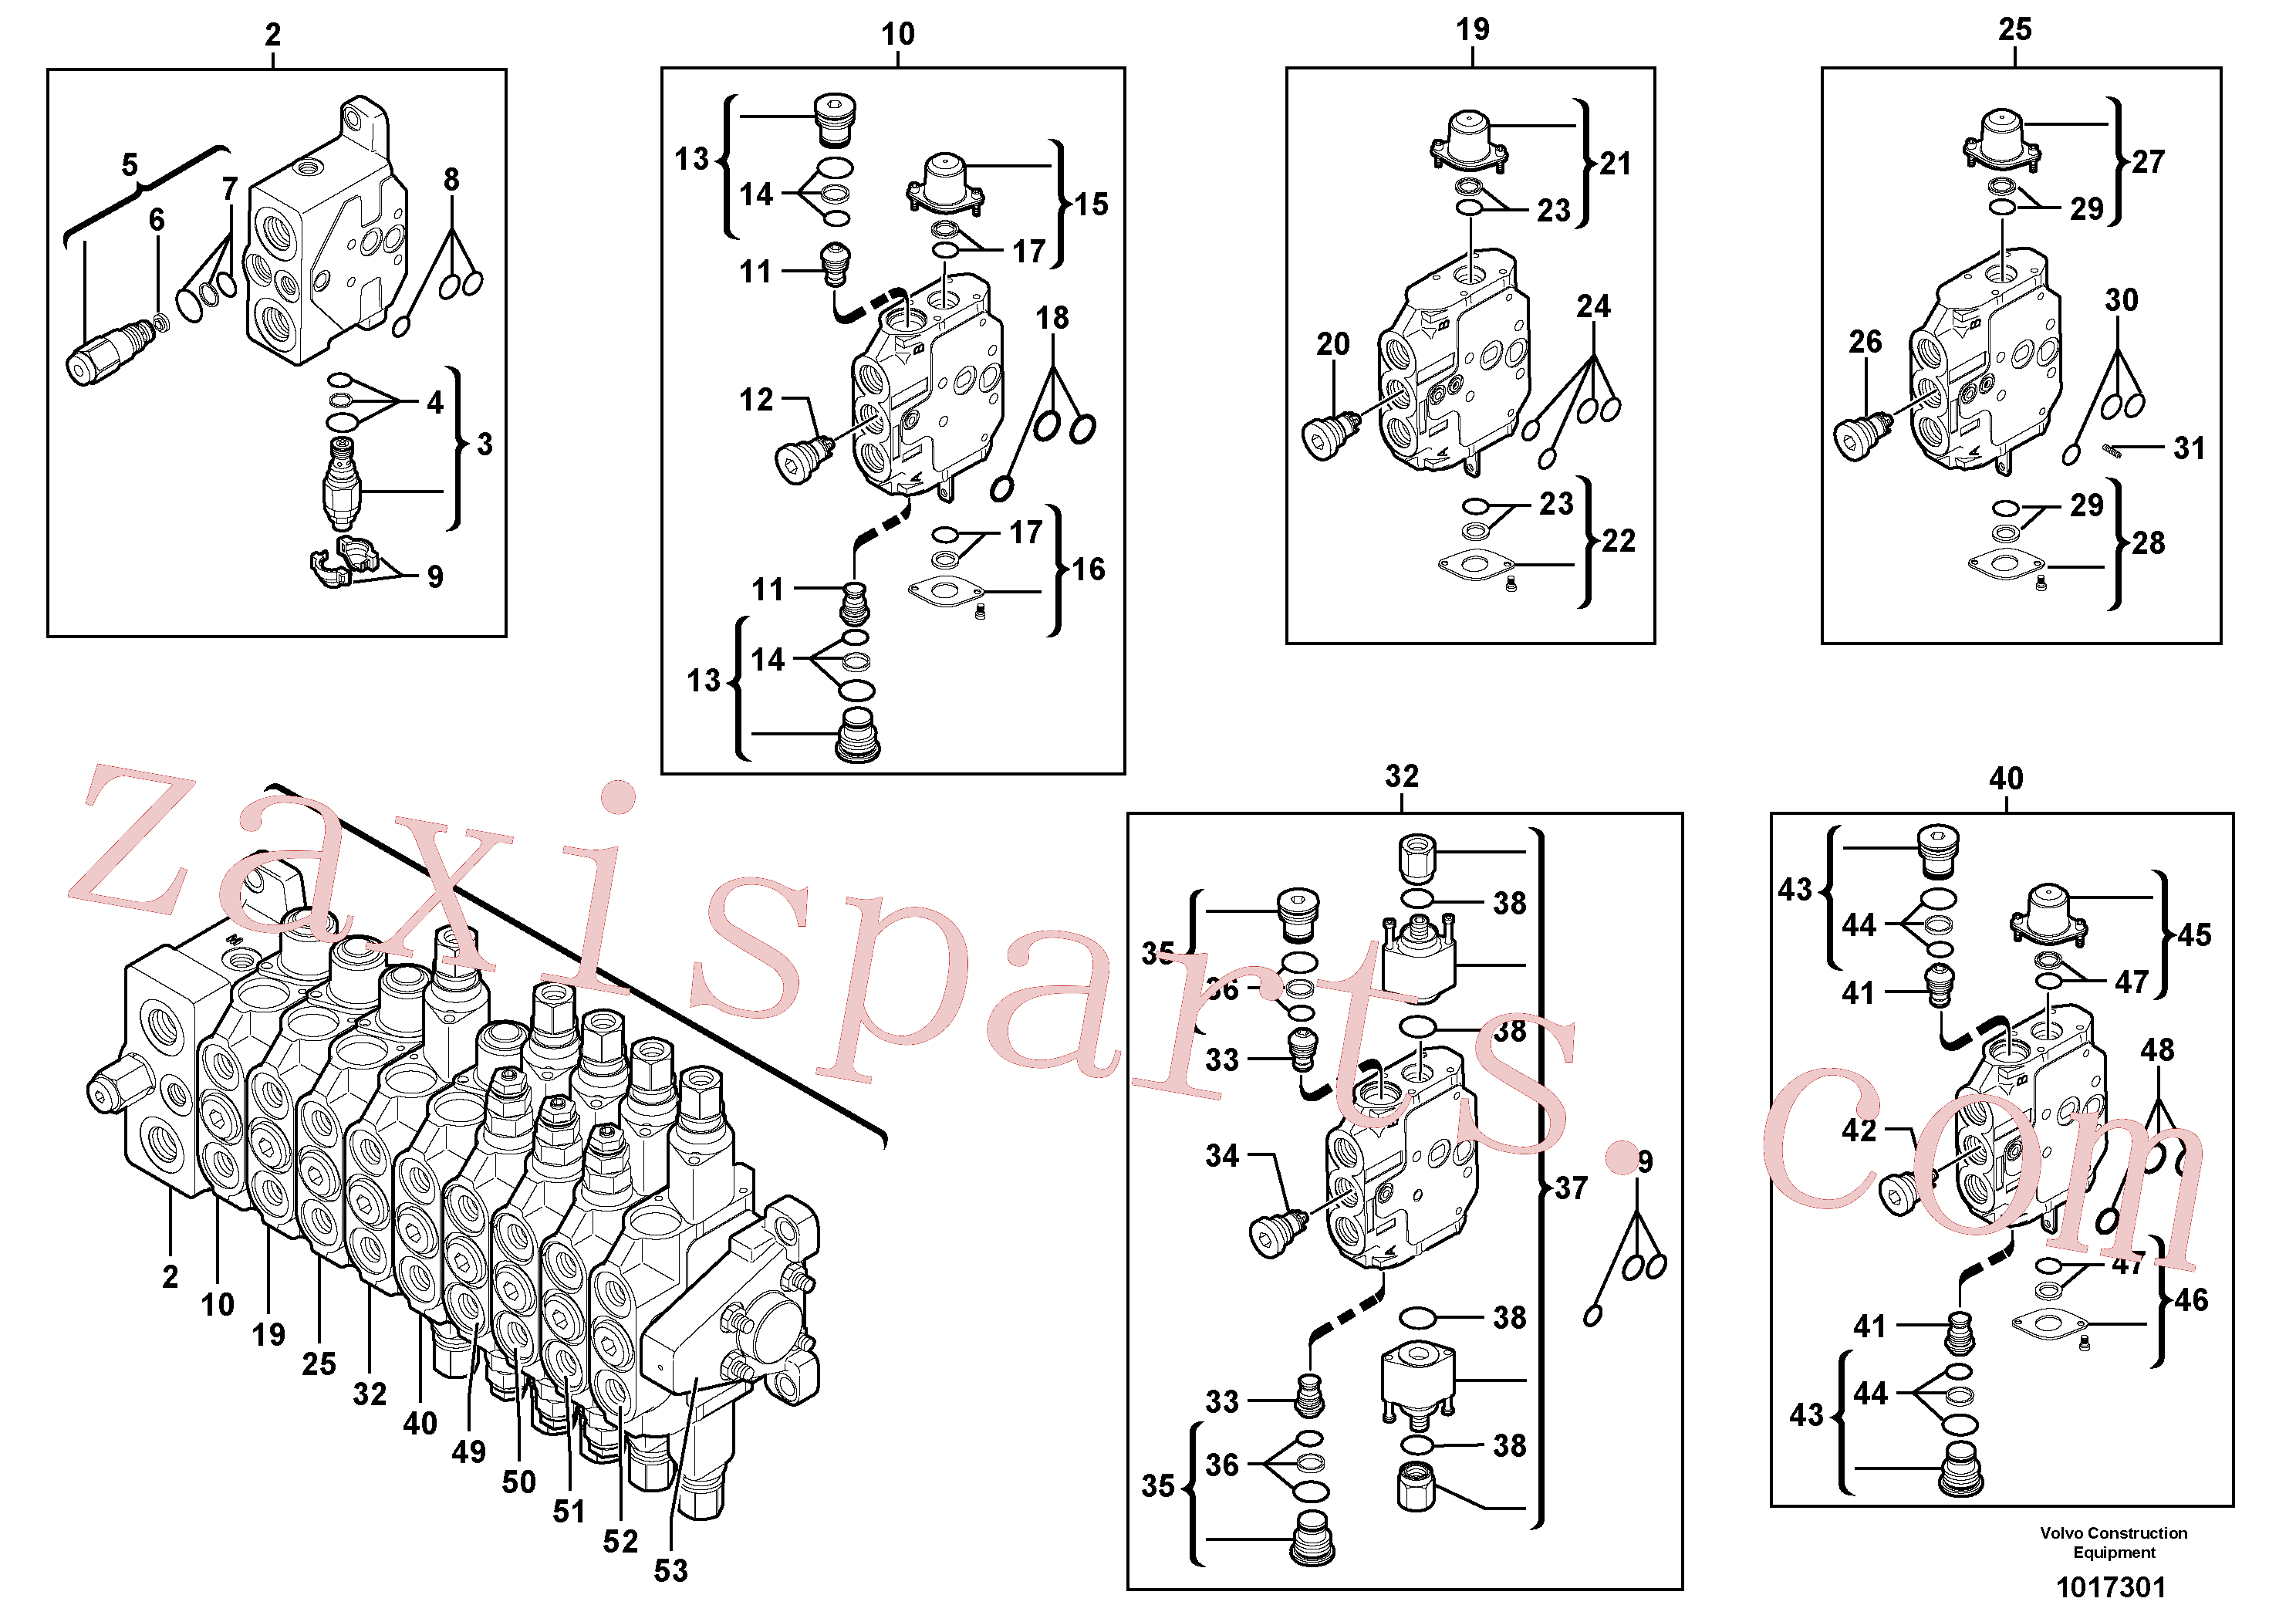 VOE11715568 for Volvo Control valve : 9 spools(1017301 assembly)